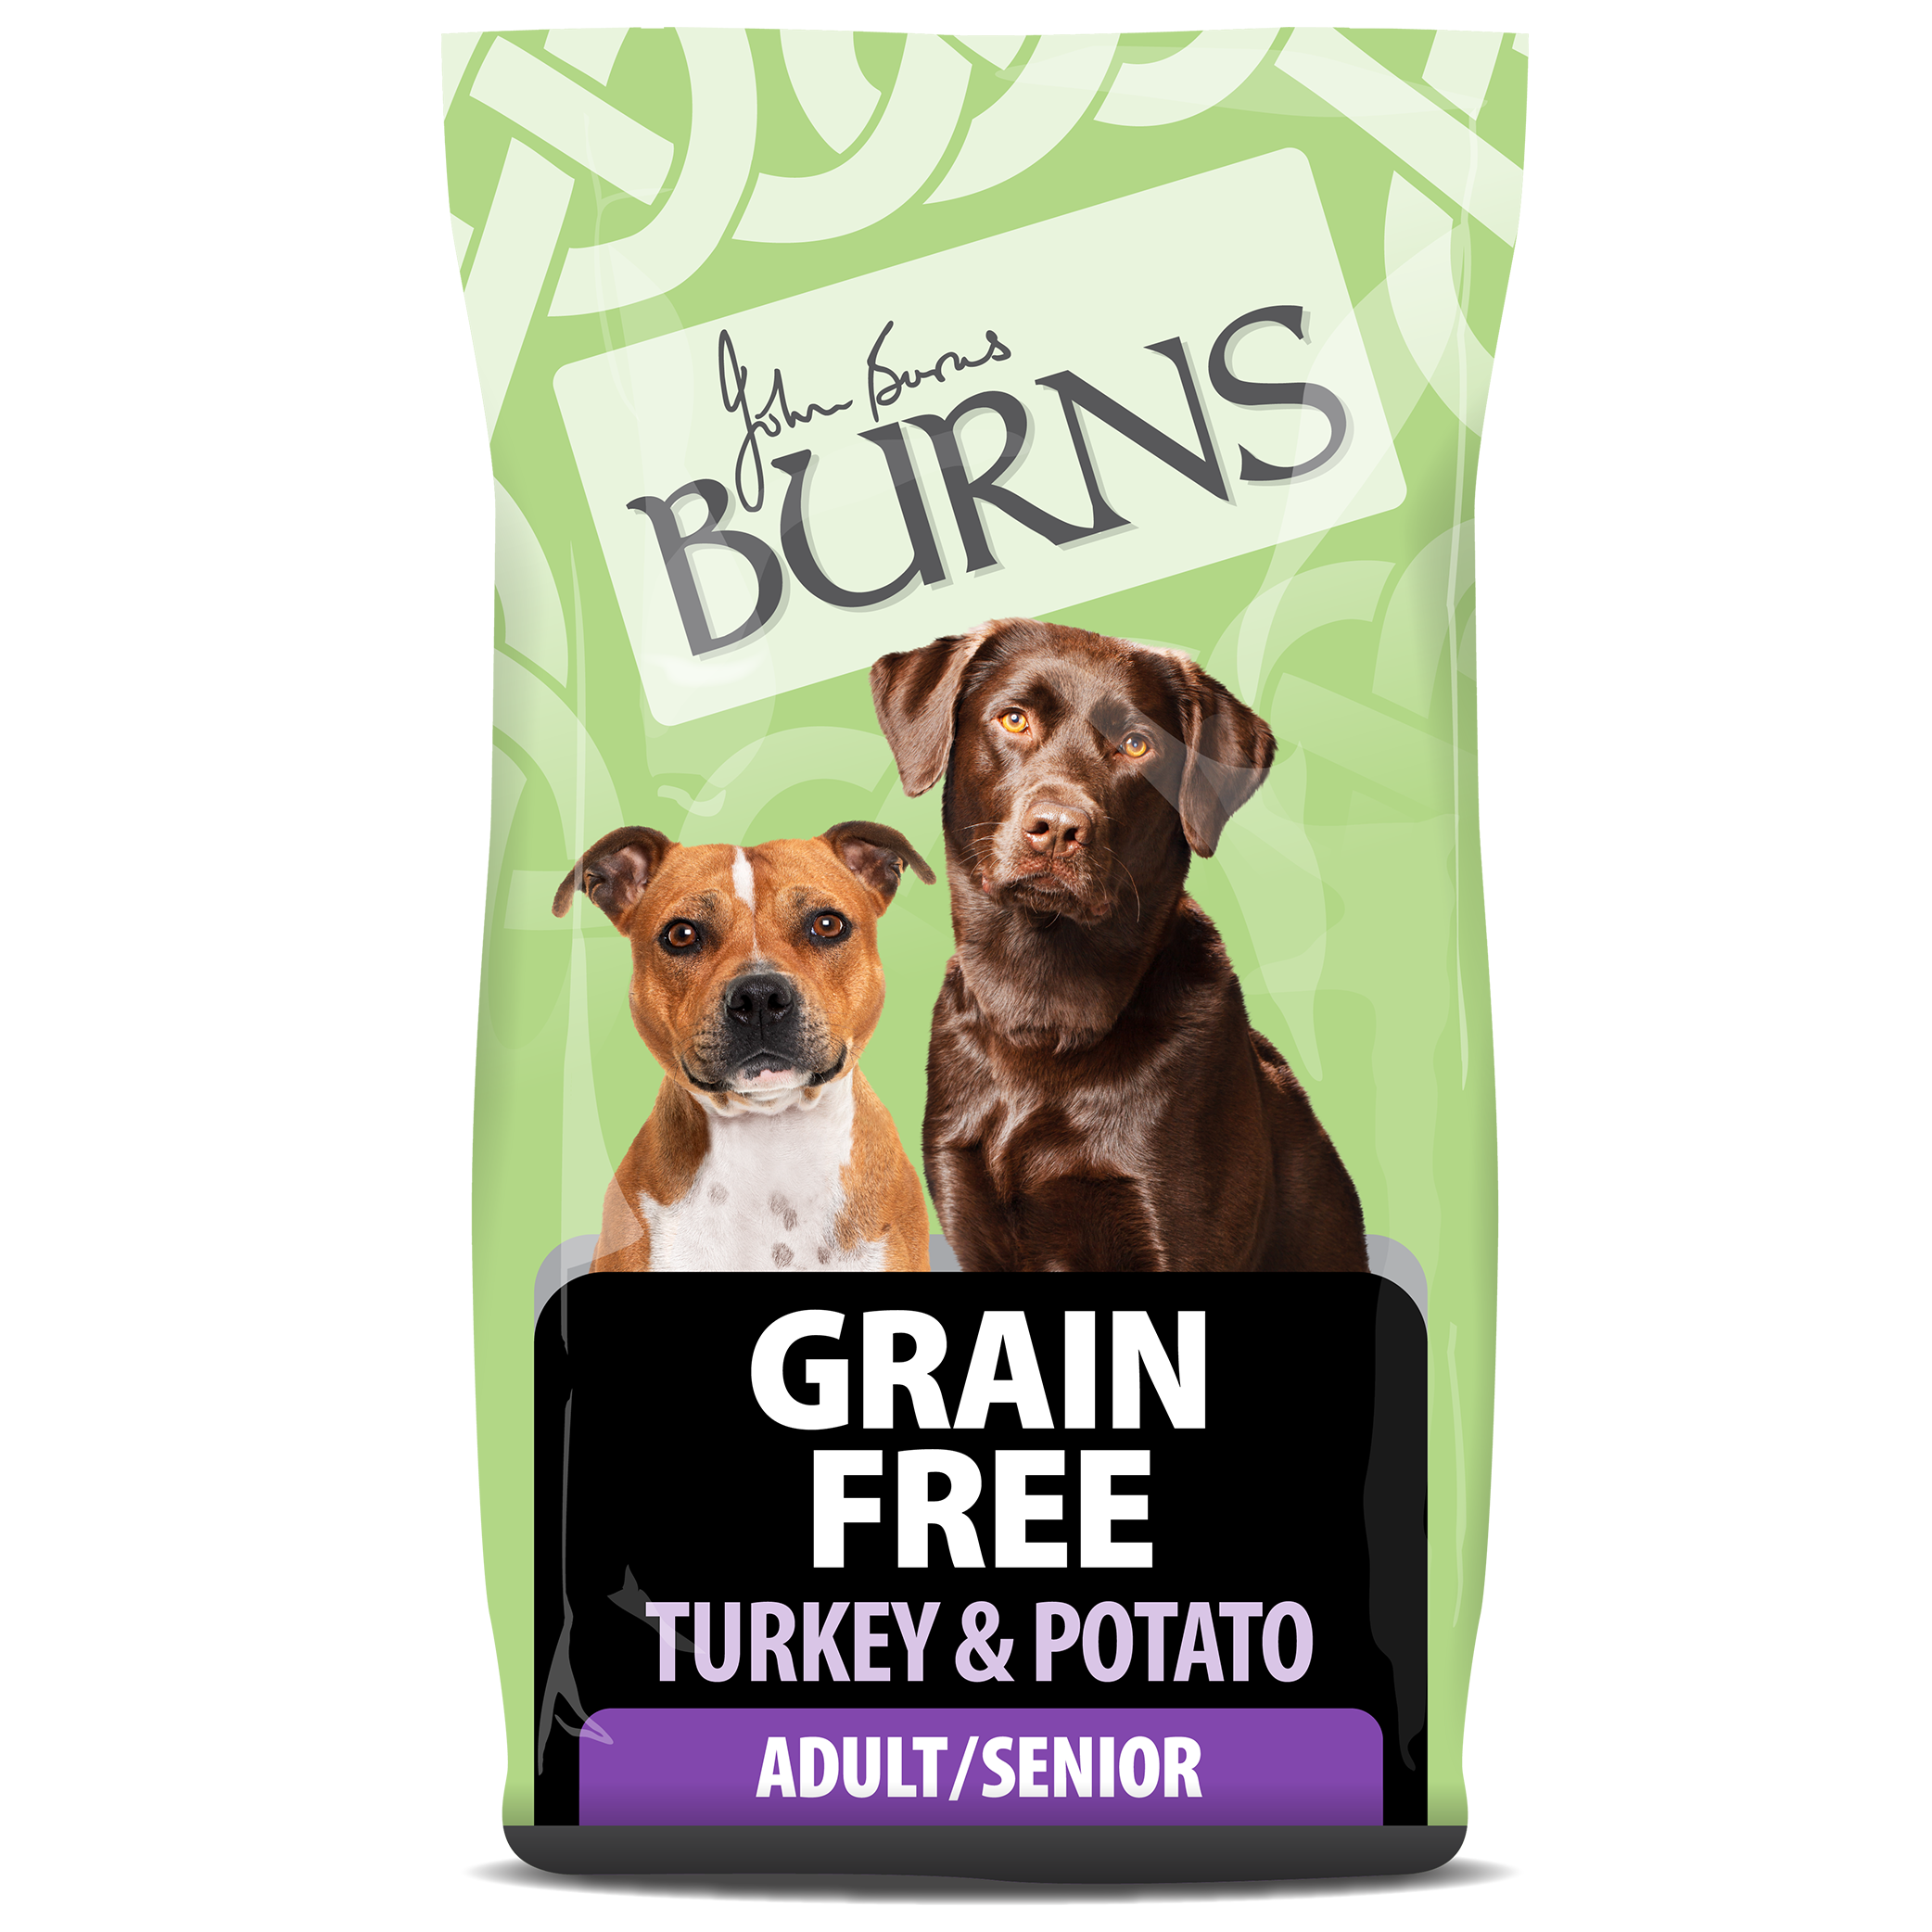 Discontinued – Grain Free for Adults